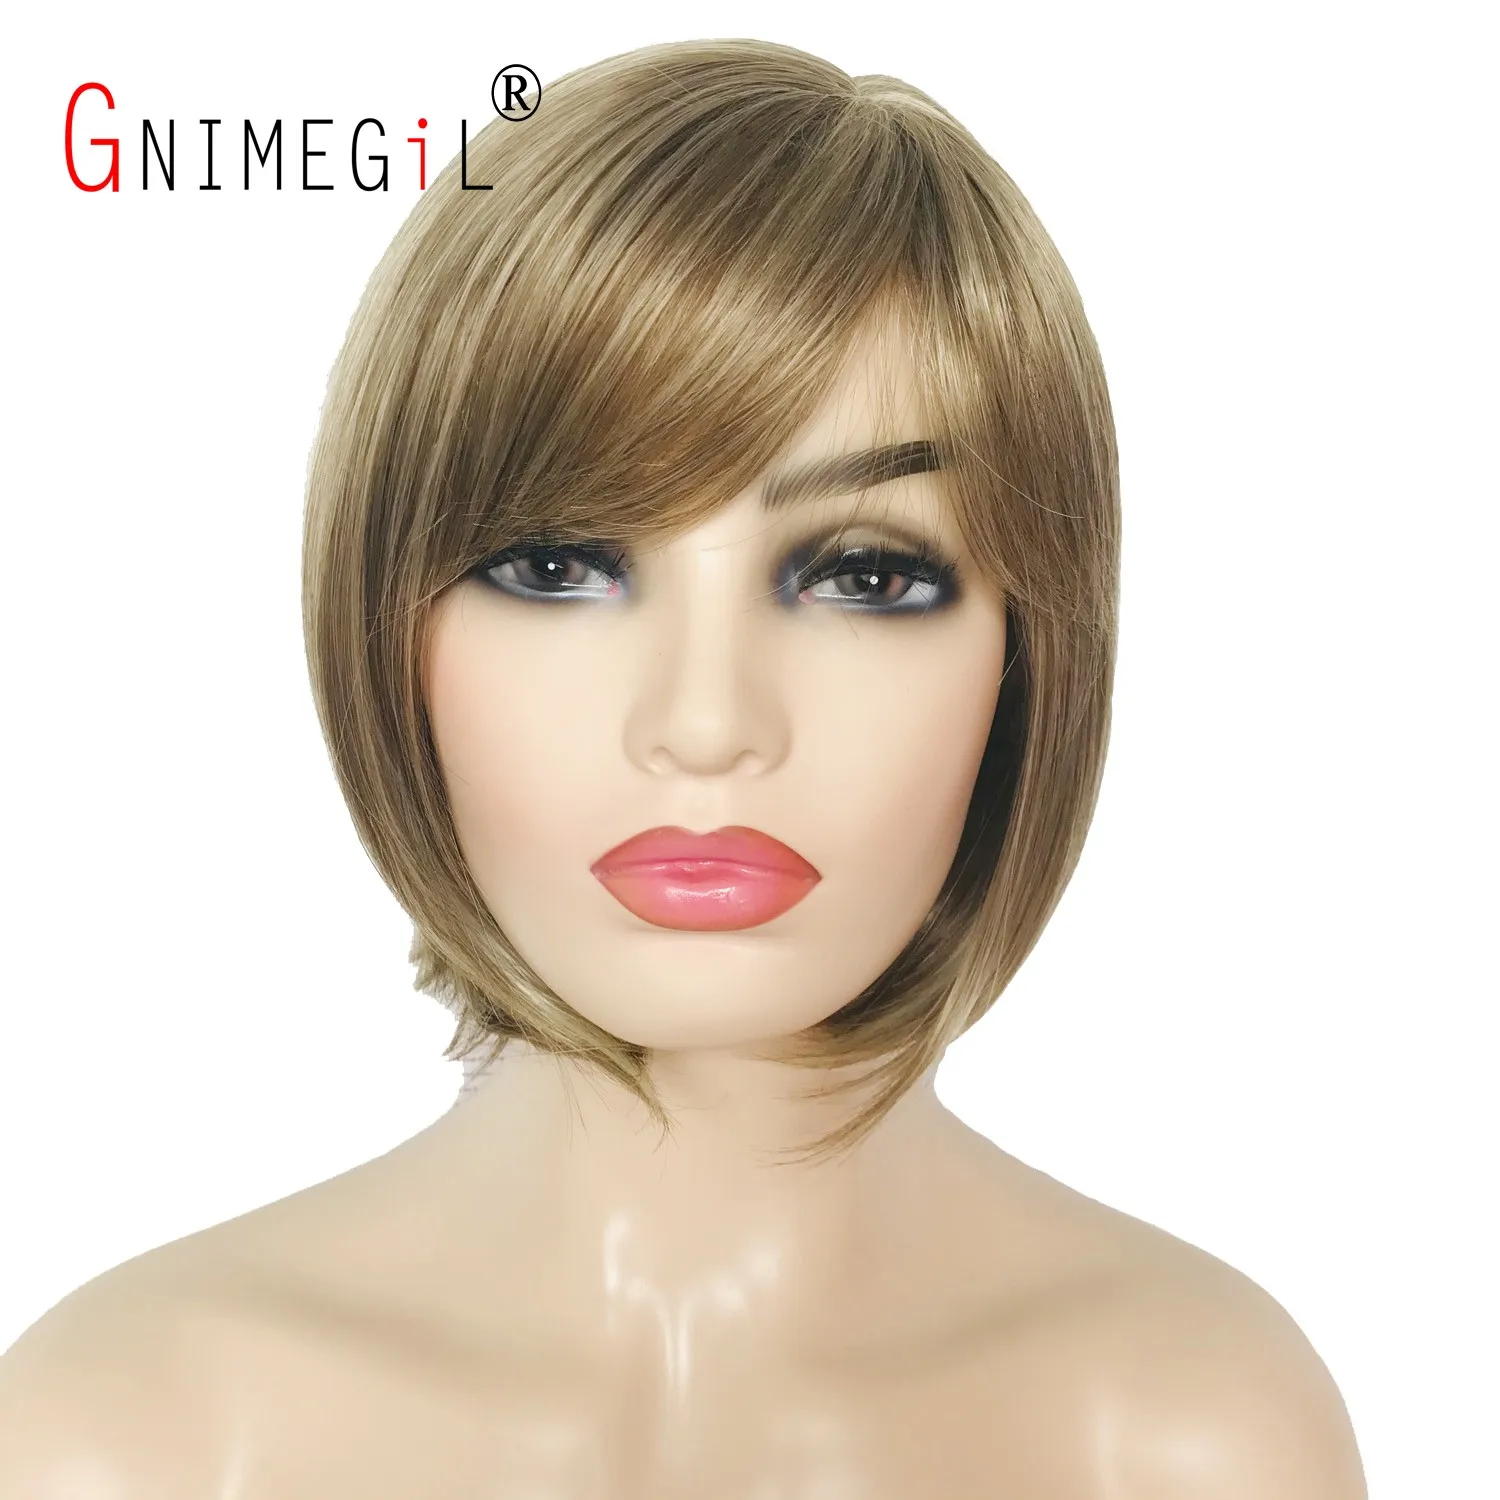 

GNIMEGIL Short Blonde Synthetic Wig with Bangs for Women Bob Hairstyles Soft Blend Highlights Hair Replacement Wigs Daily Wear